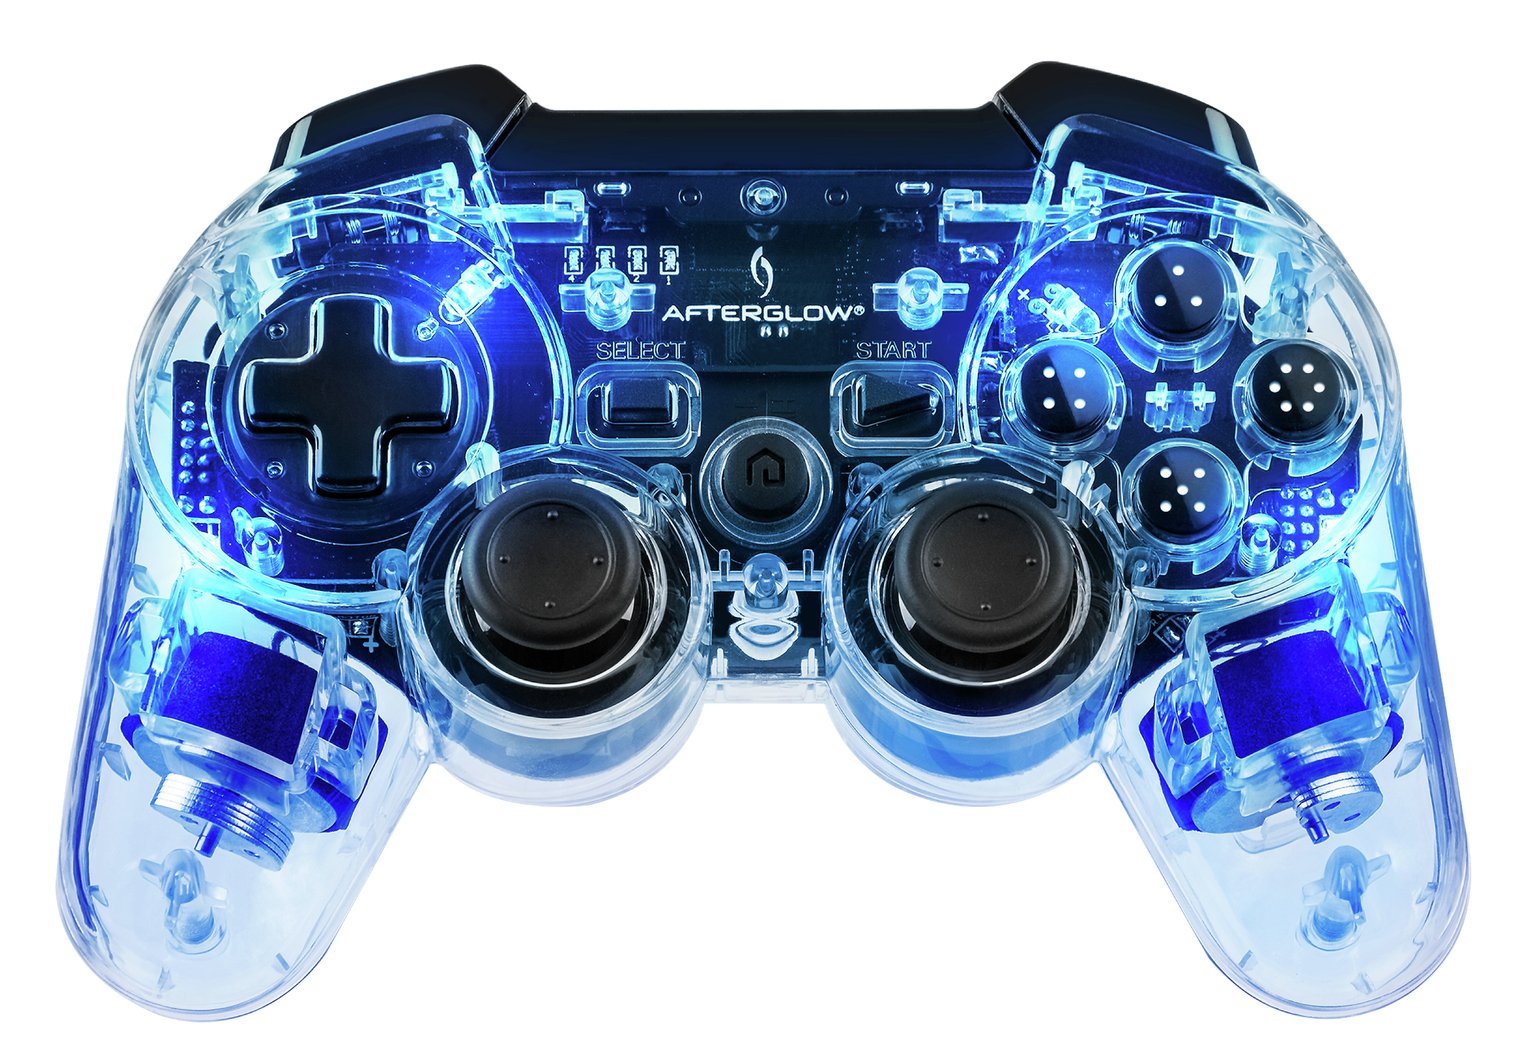 Afterglow Wireless Controller for PS3 - Blue